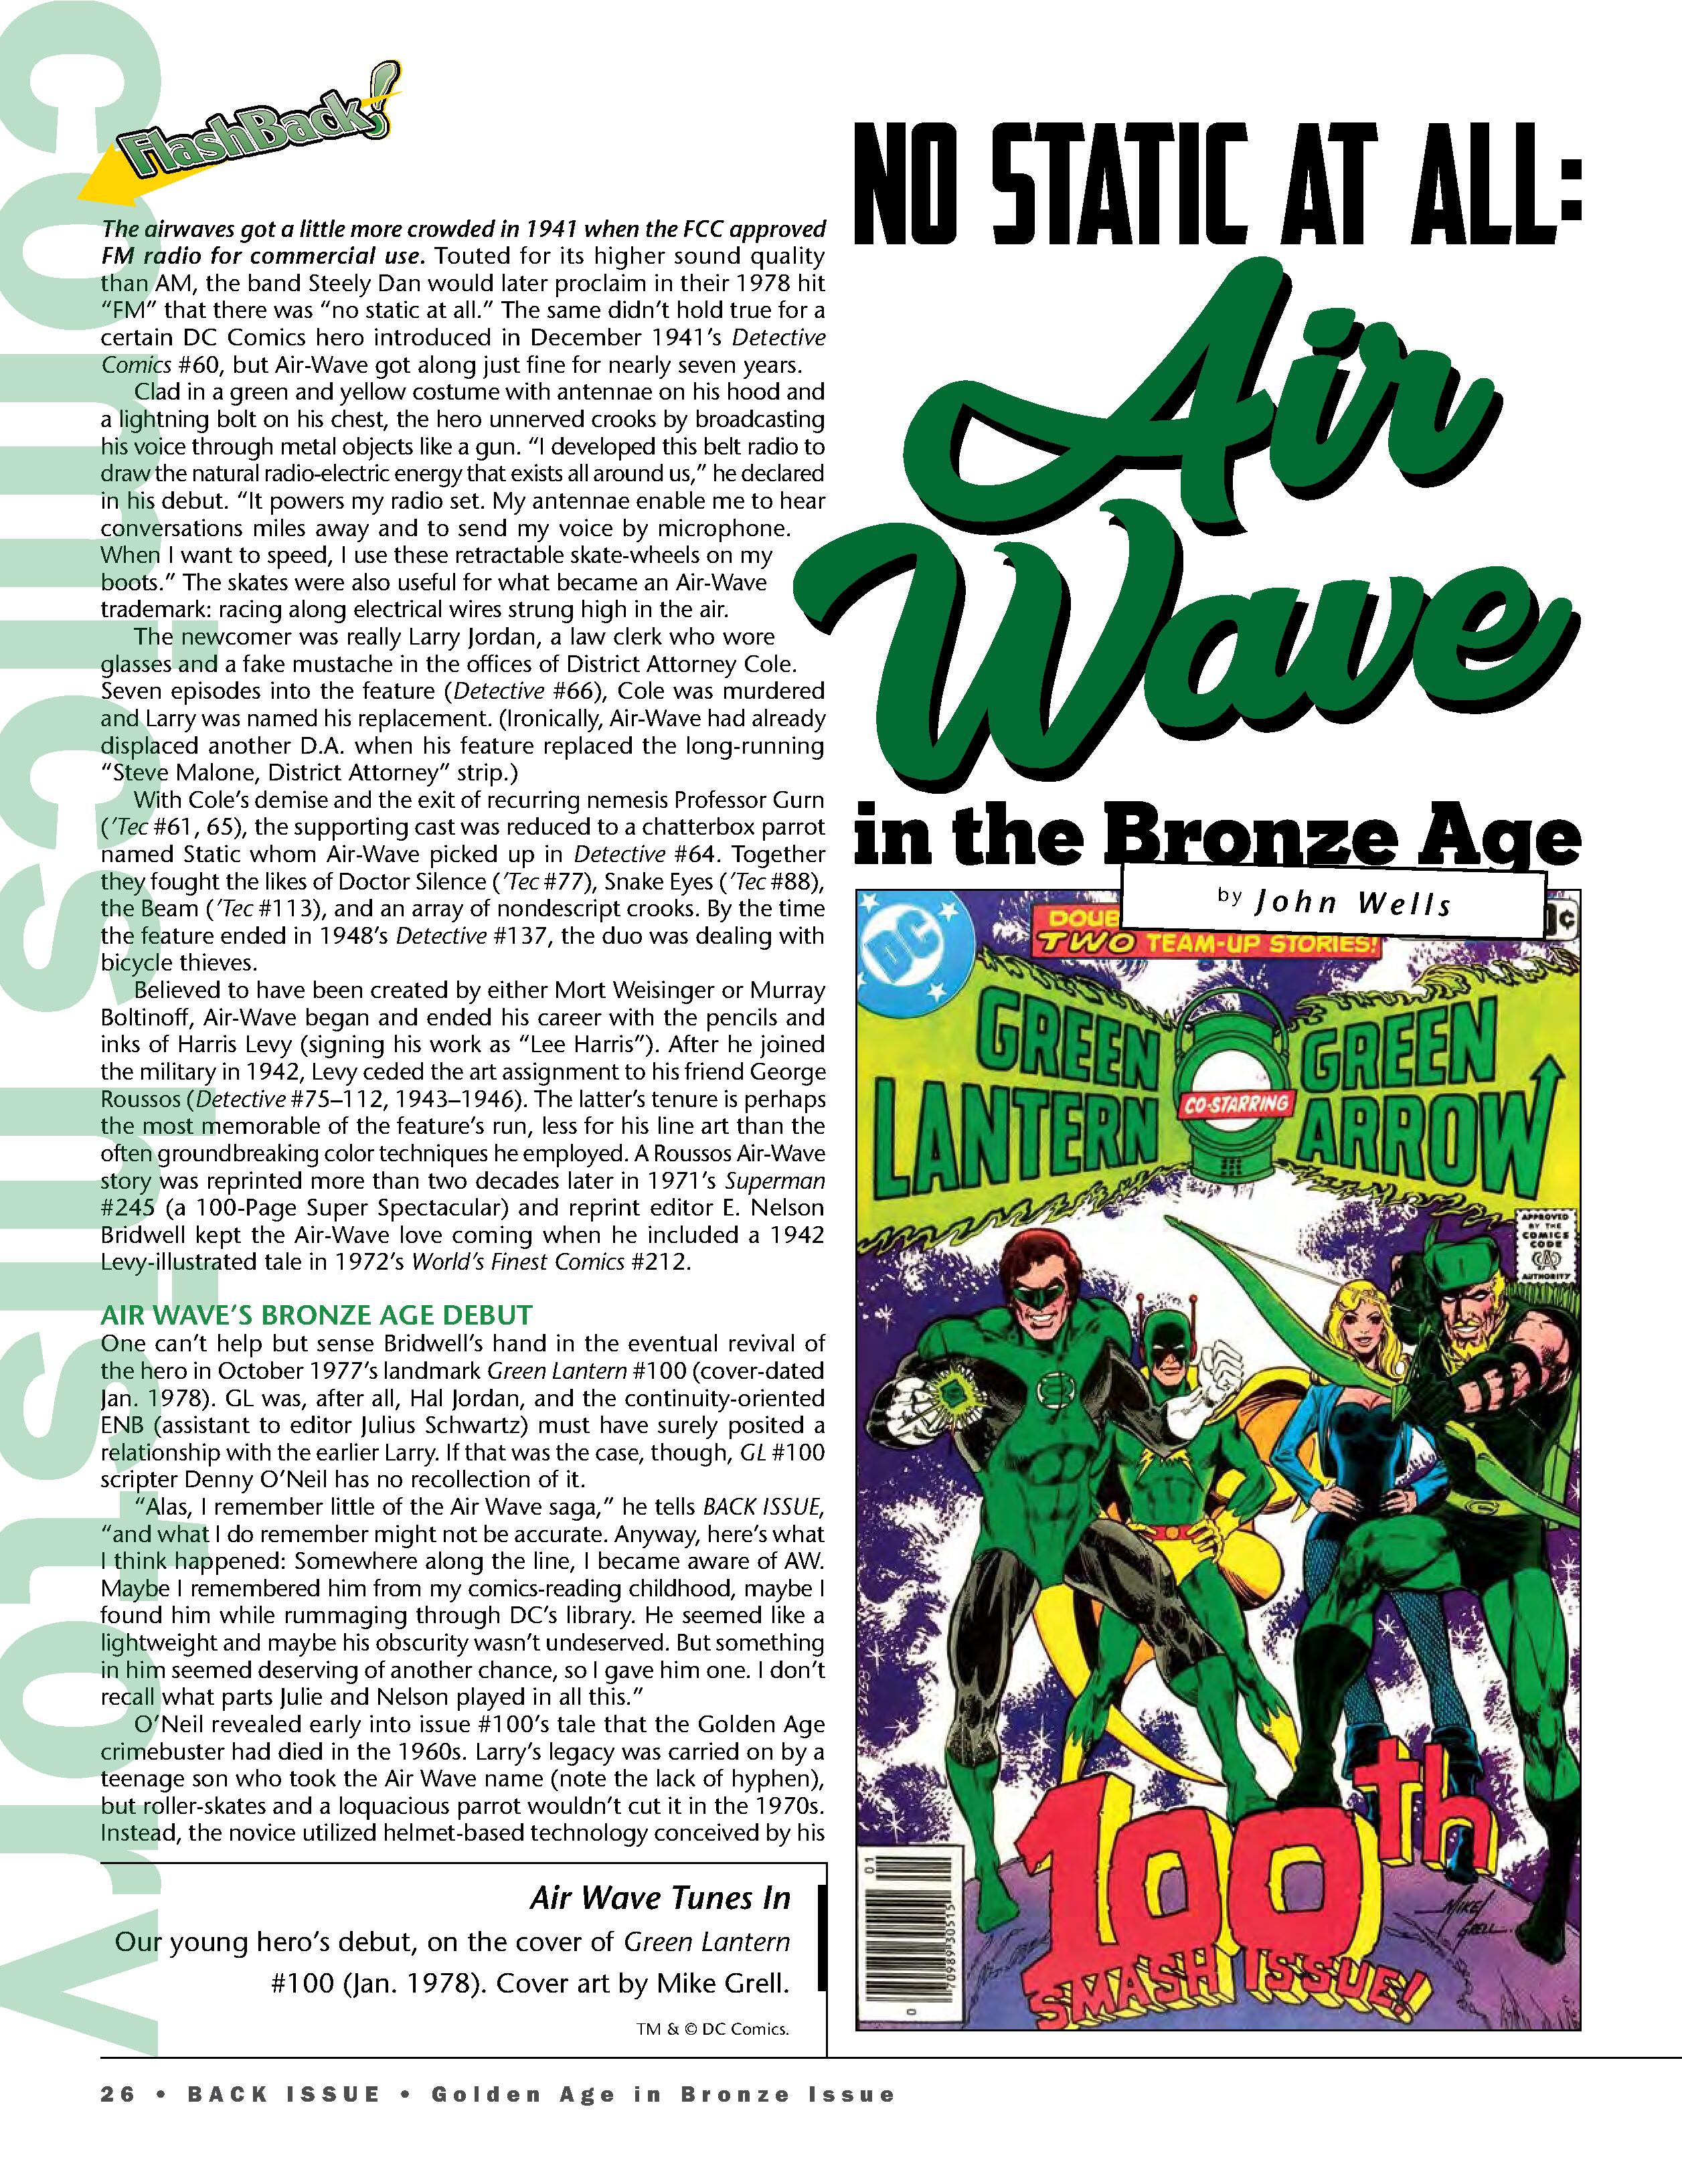 Read online Back Issue comic -  Issue #106 - 28